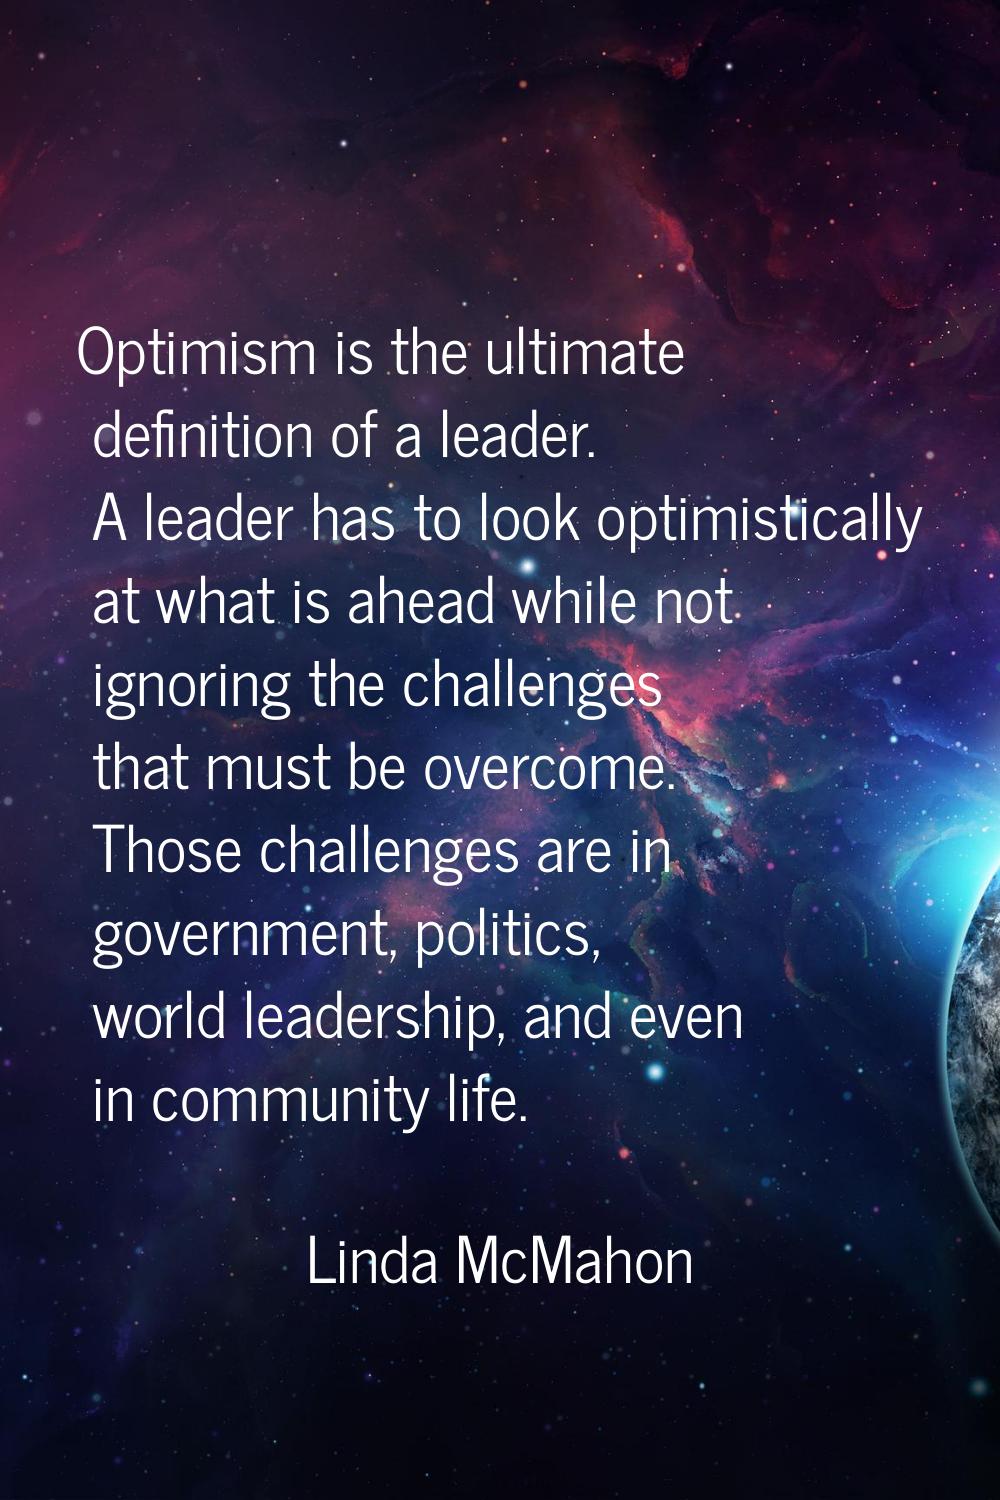 Optimism is the ultimate definition of a leader. A leader has to look optimistically at what is ahe